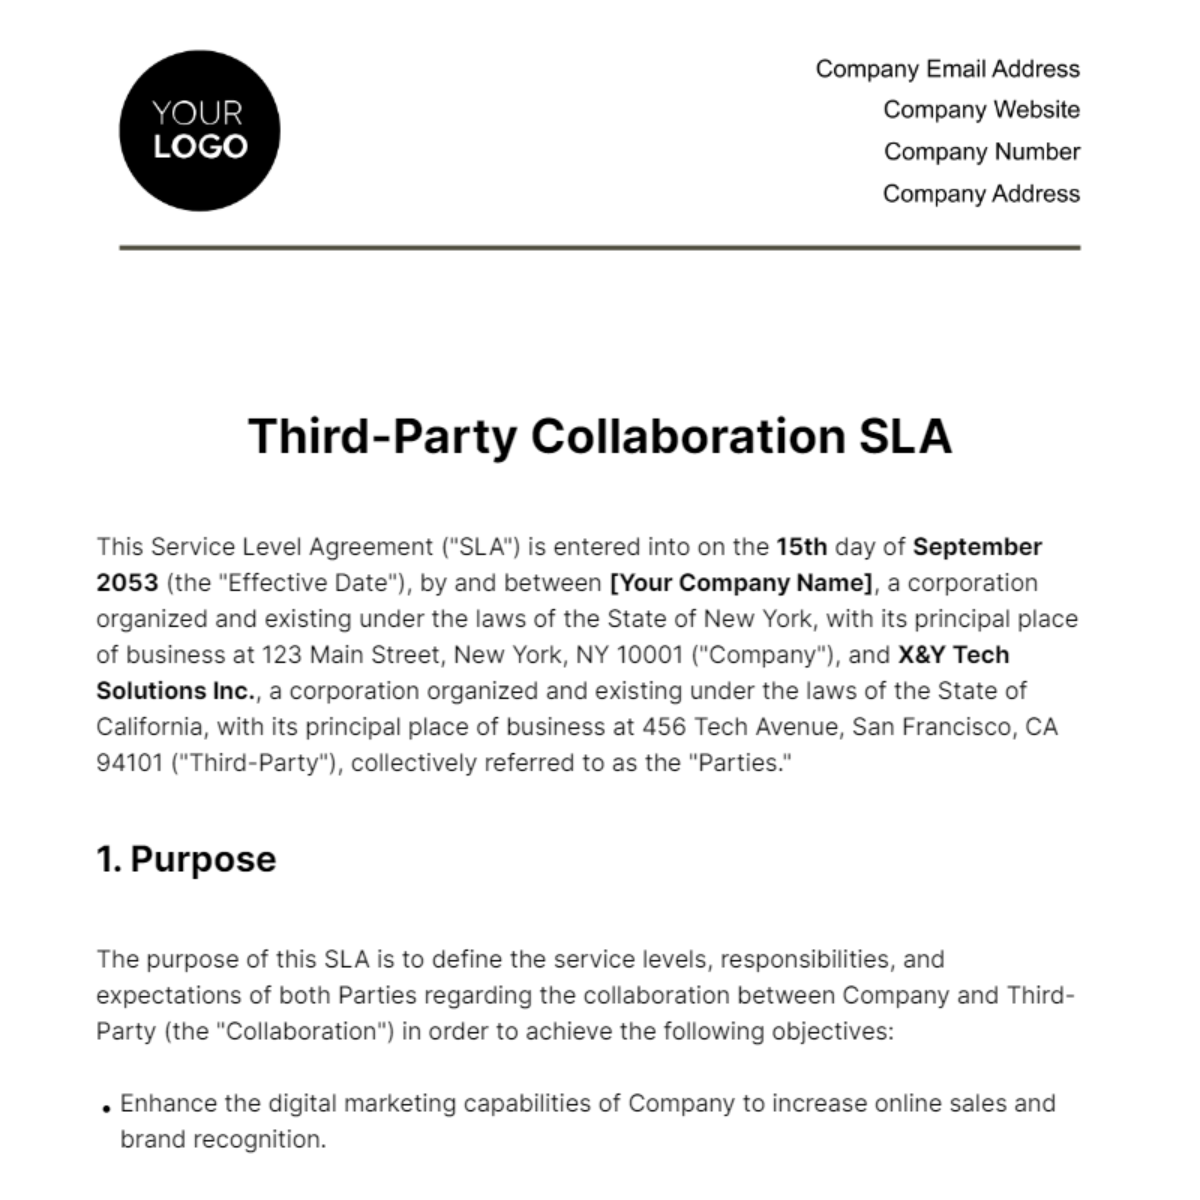 Free Third-Party Collaboration SLA HR Template